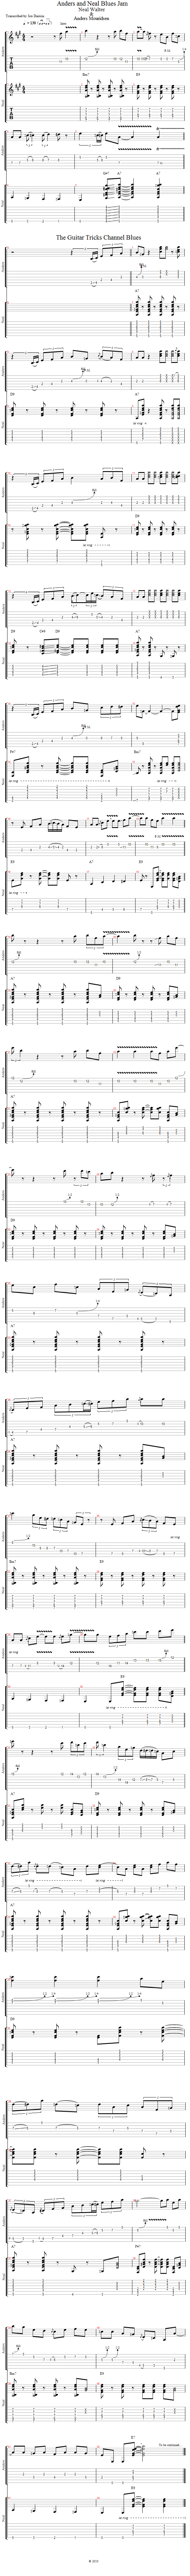 Guitar Tricks 41: Anders and Neal blues jam song notation